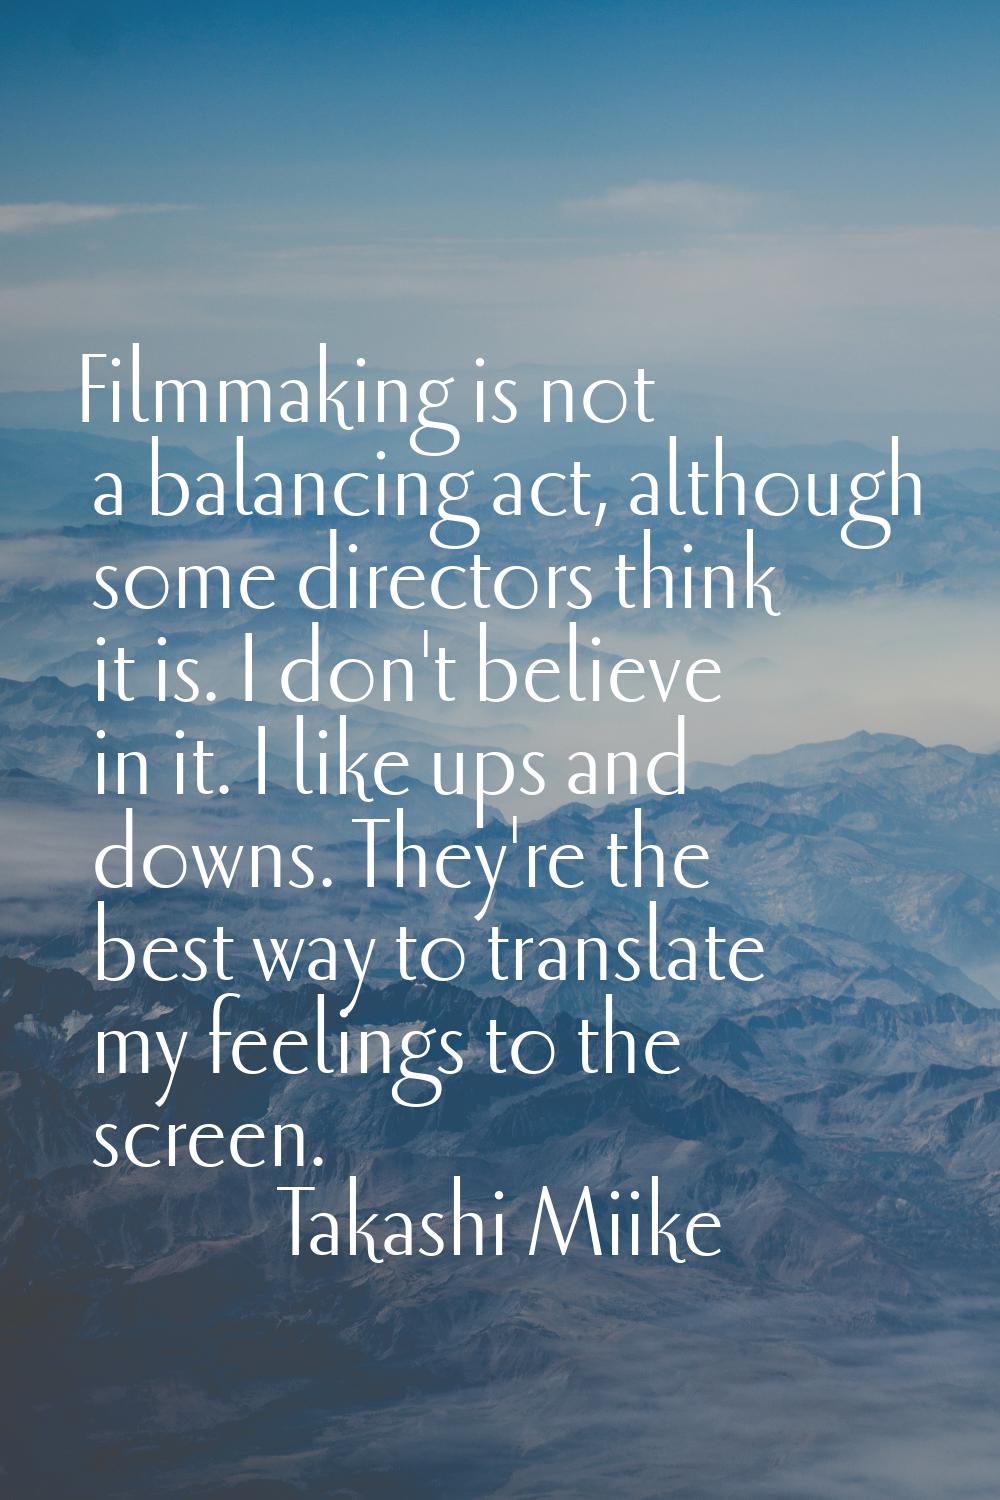 Filmmaking is not a balancing act, although some directors think it is. I don't believe in it. I li